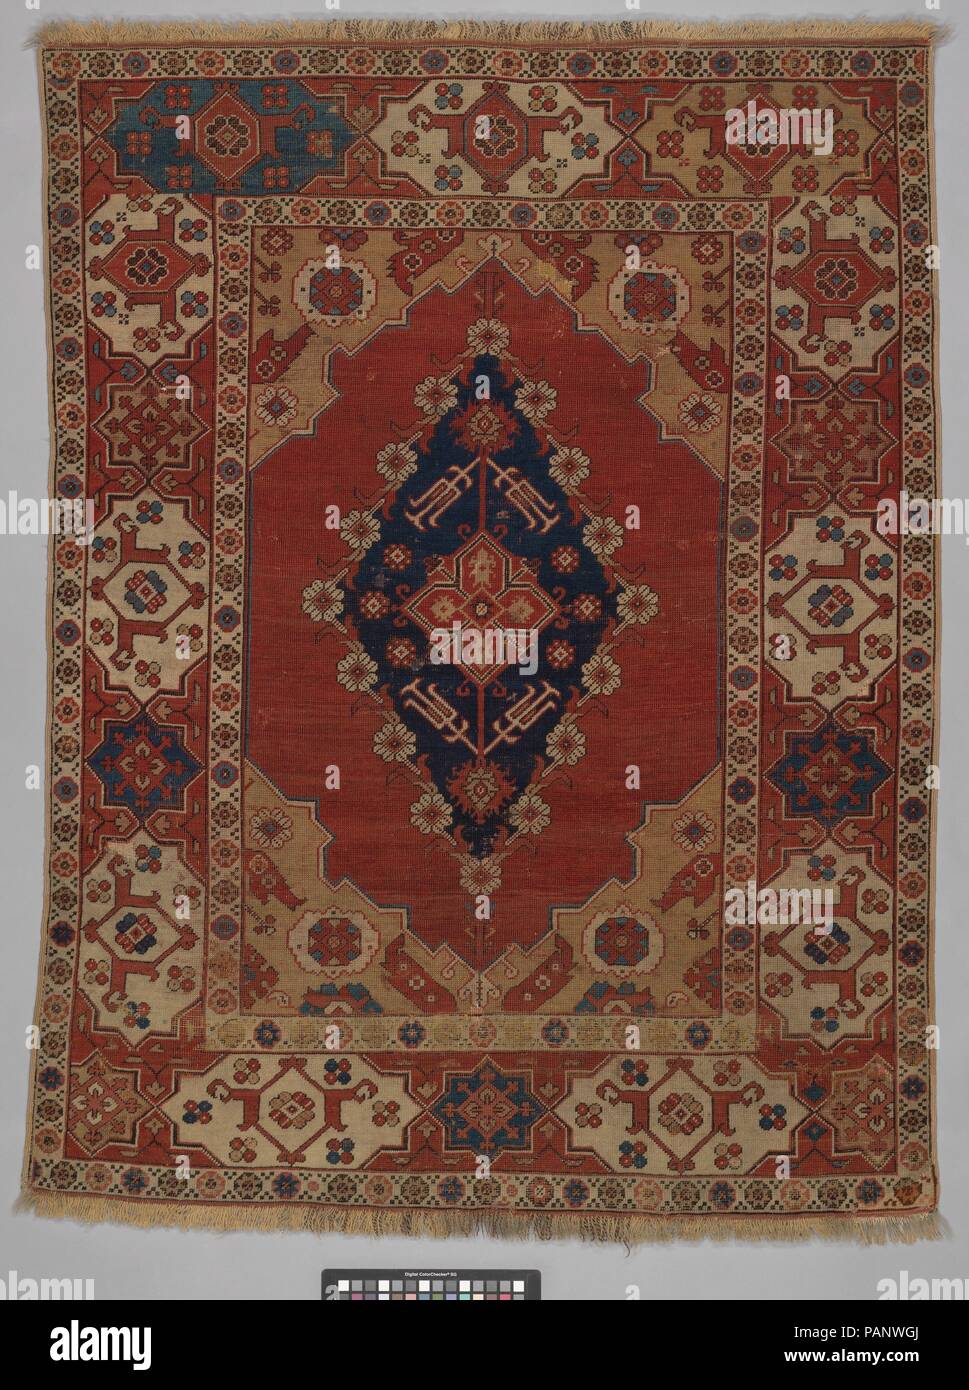 Carpet. Dimensions: Rug: H. 63 1/2 in. (161.3 cm)  W. 47 1/2 in. (120.7 cm). Date: 18th century.  Sometimes called 'Transylvanian' carpets because many examples were found in central European churches of Hungary and Romania, where they were votive gifts, small carpets like this are often depicted in European portraits of the sixteenth and seventeenth centuries draped over tables; later carpets such as this one are more infrequently encountered in paintings. Museum: Metropolitan Museum of Art, New York, USA. Stock Photo